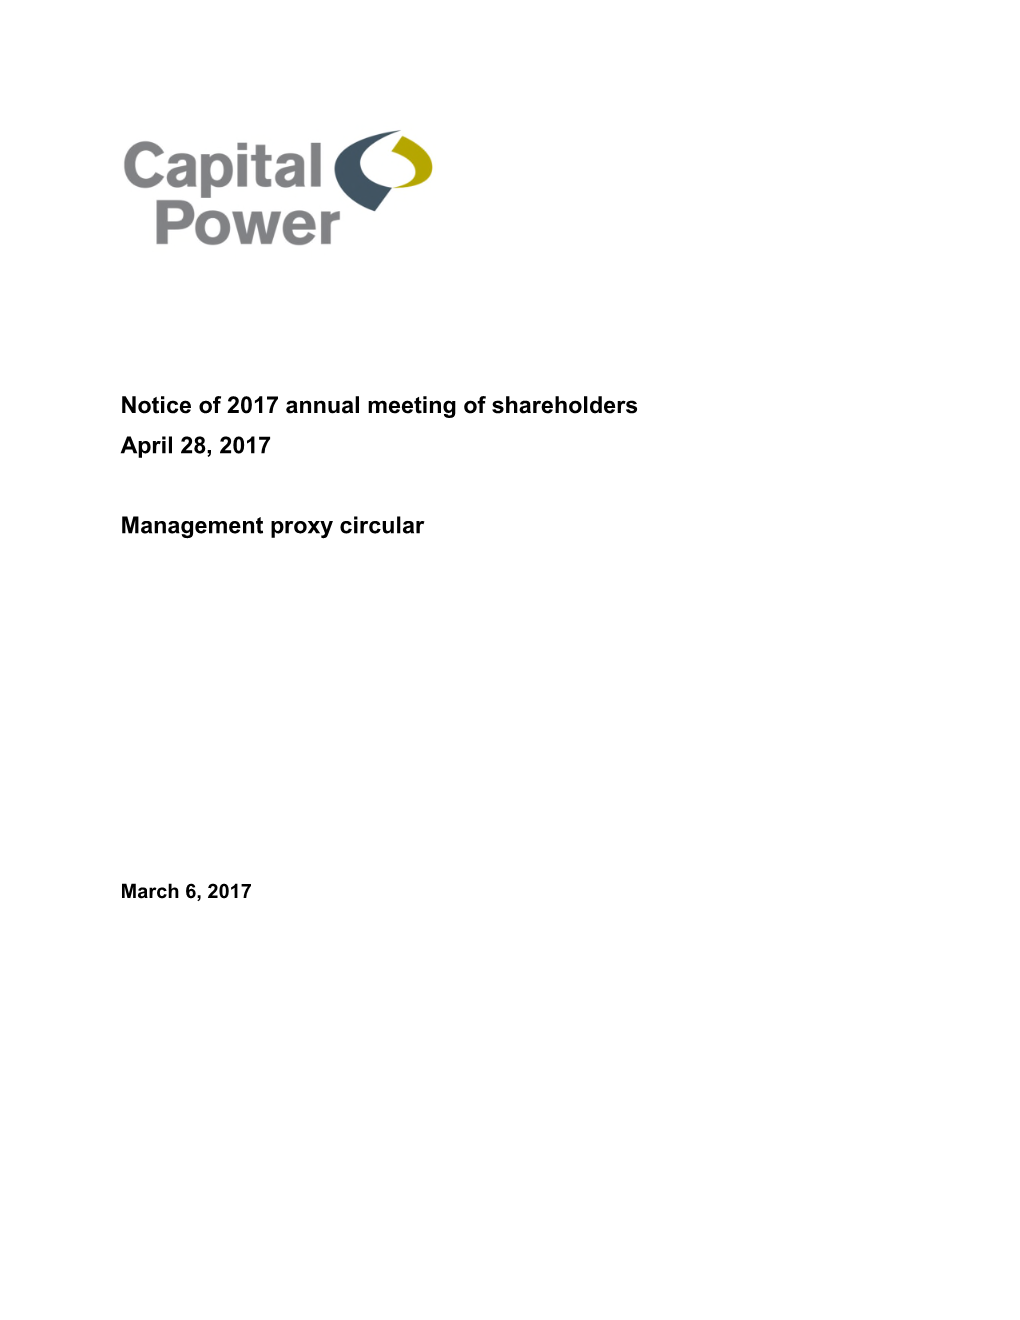 Notice of 2017 Annual Meeting of Shareholders April 28, 2017